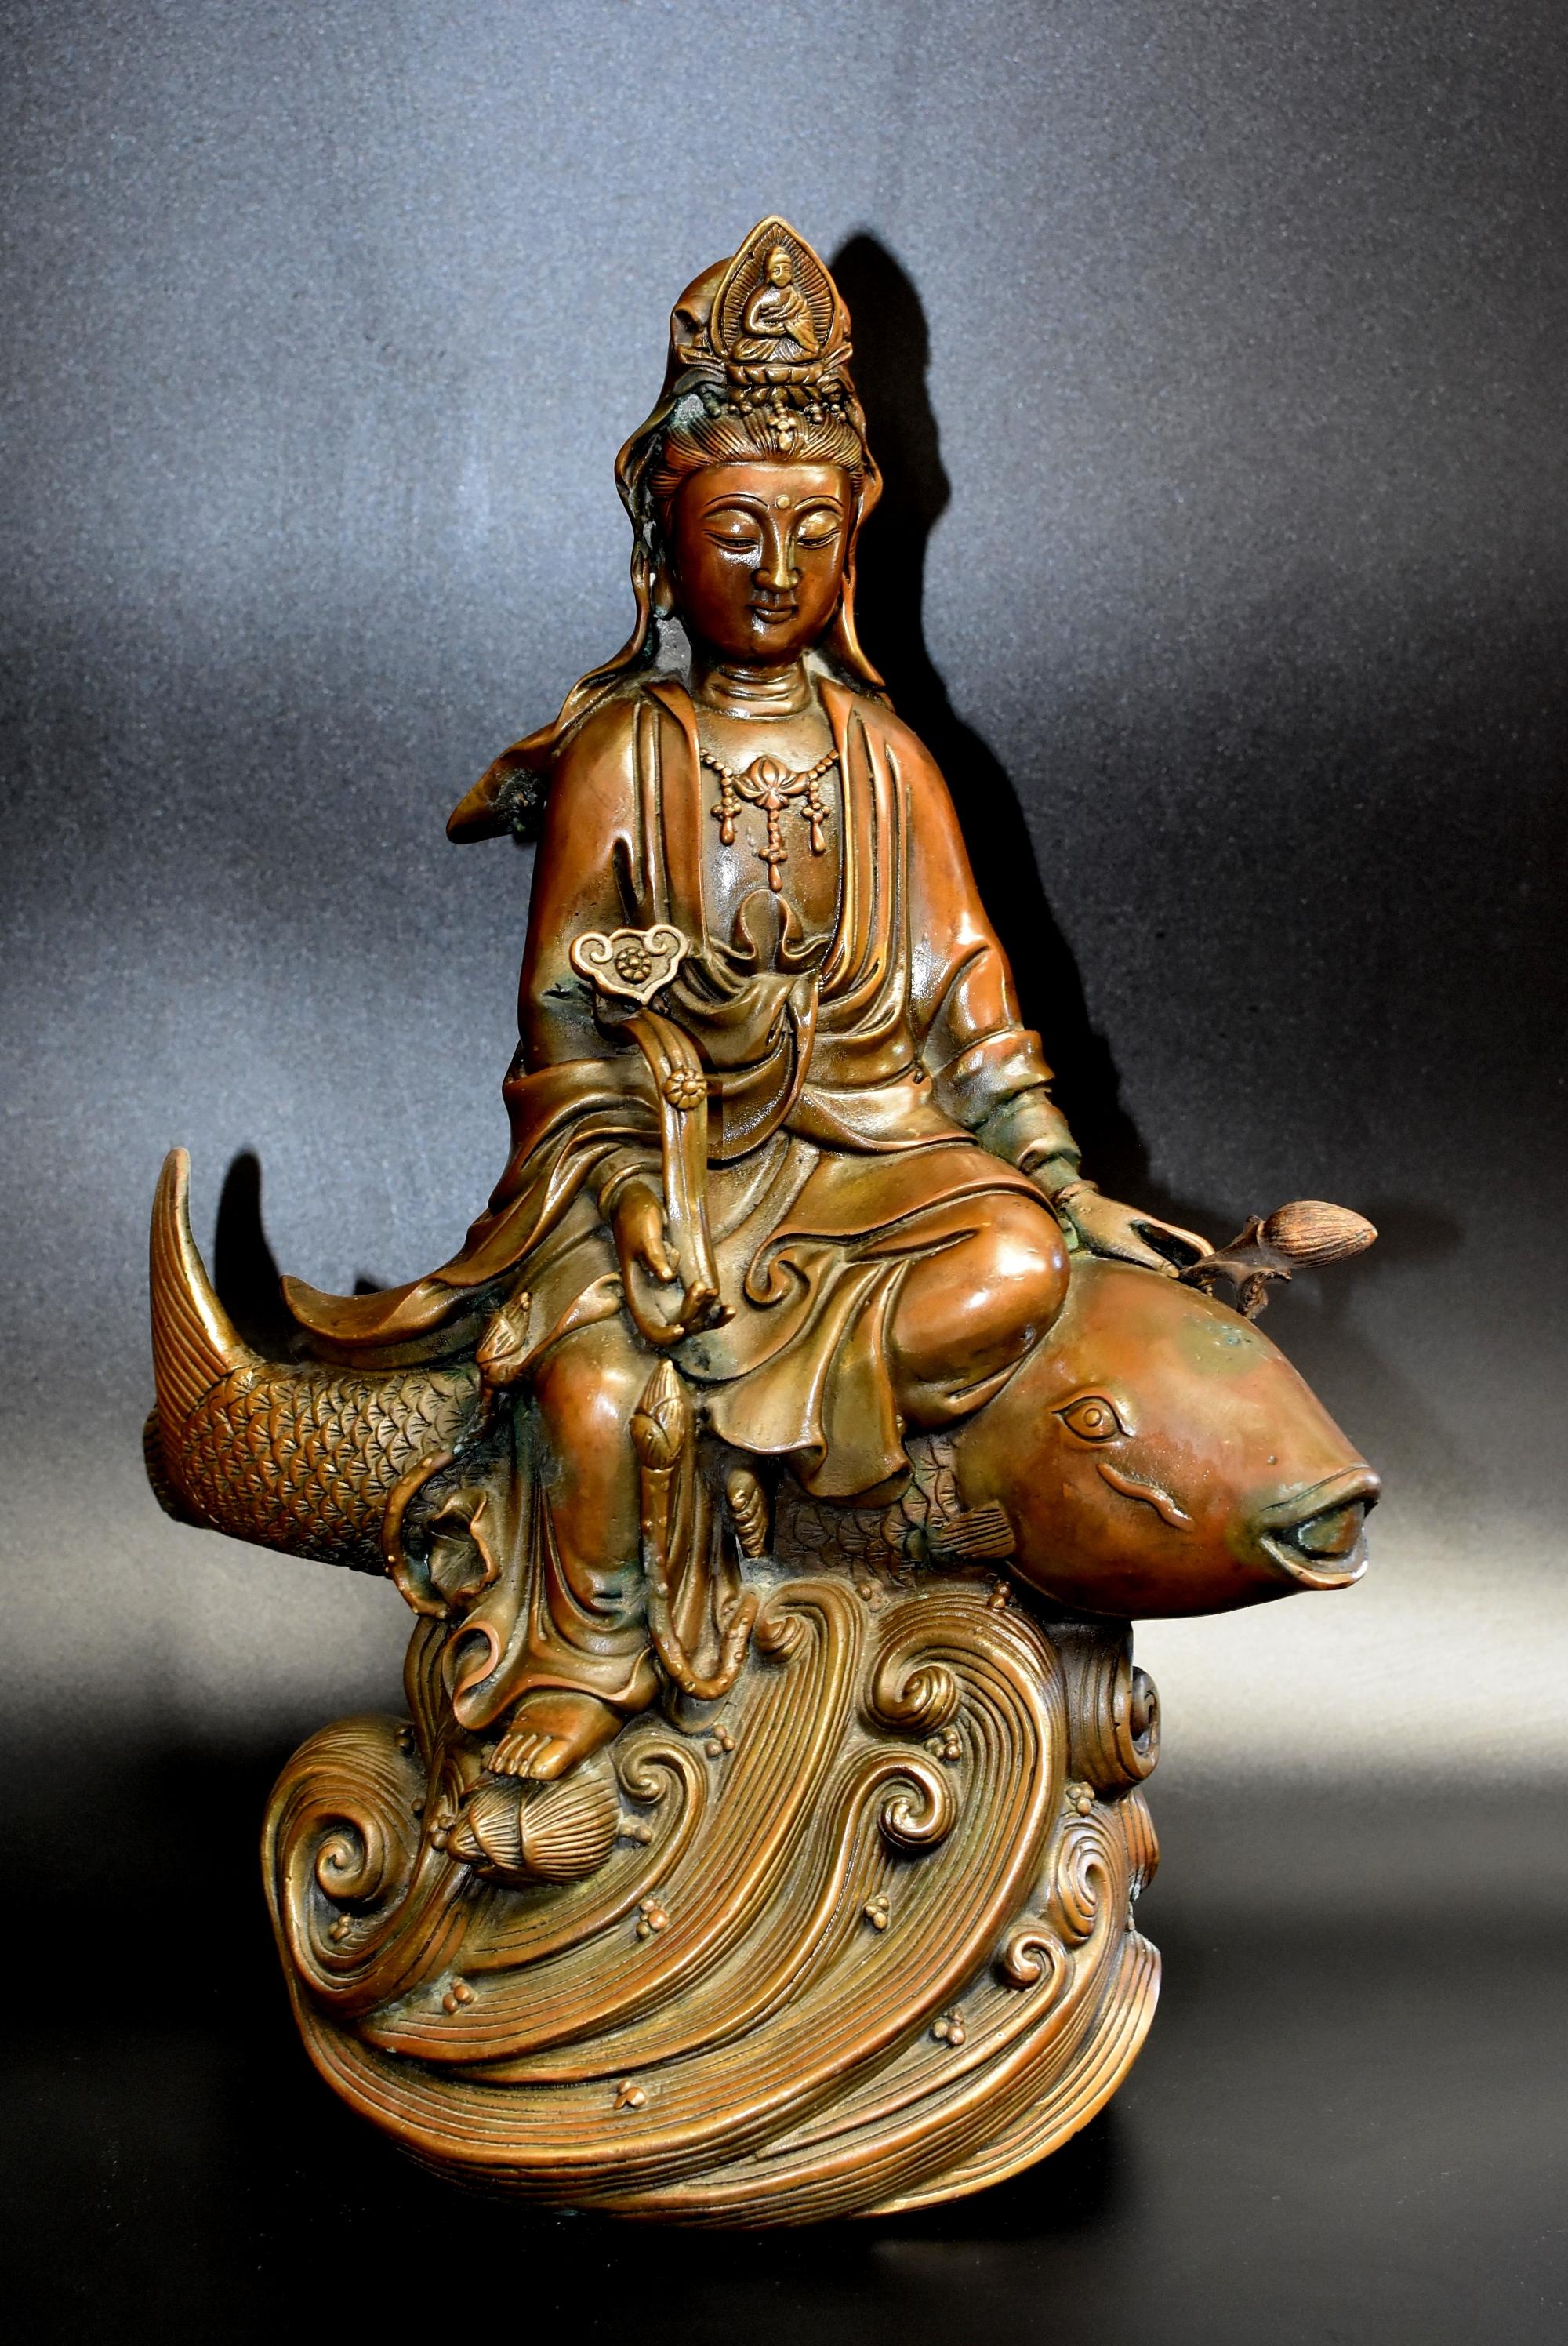 A substantial, 14 lb statue of Kwan Yin, the Goddess of Mercy. Holding a lotus in one hand and a ruyi scepter in the other, she is seated on a large koi fish above water waves. Kwan Yin is believed to bring blessings and grant wishes. In this